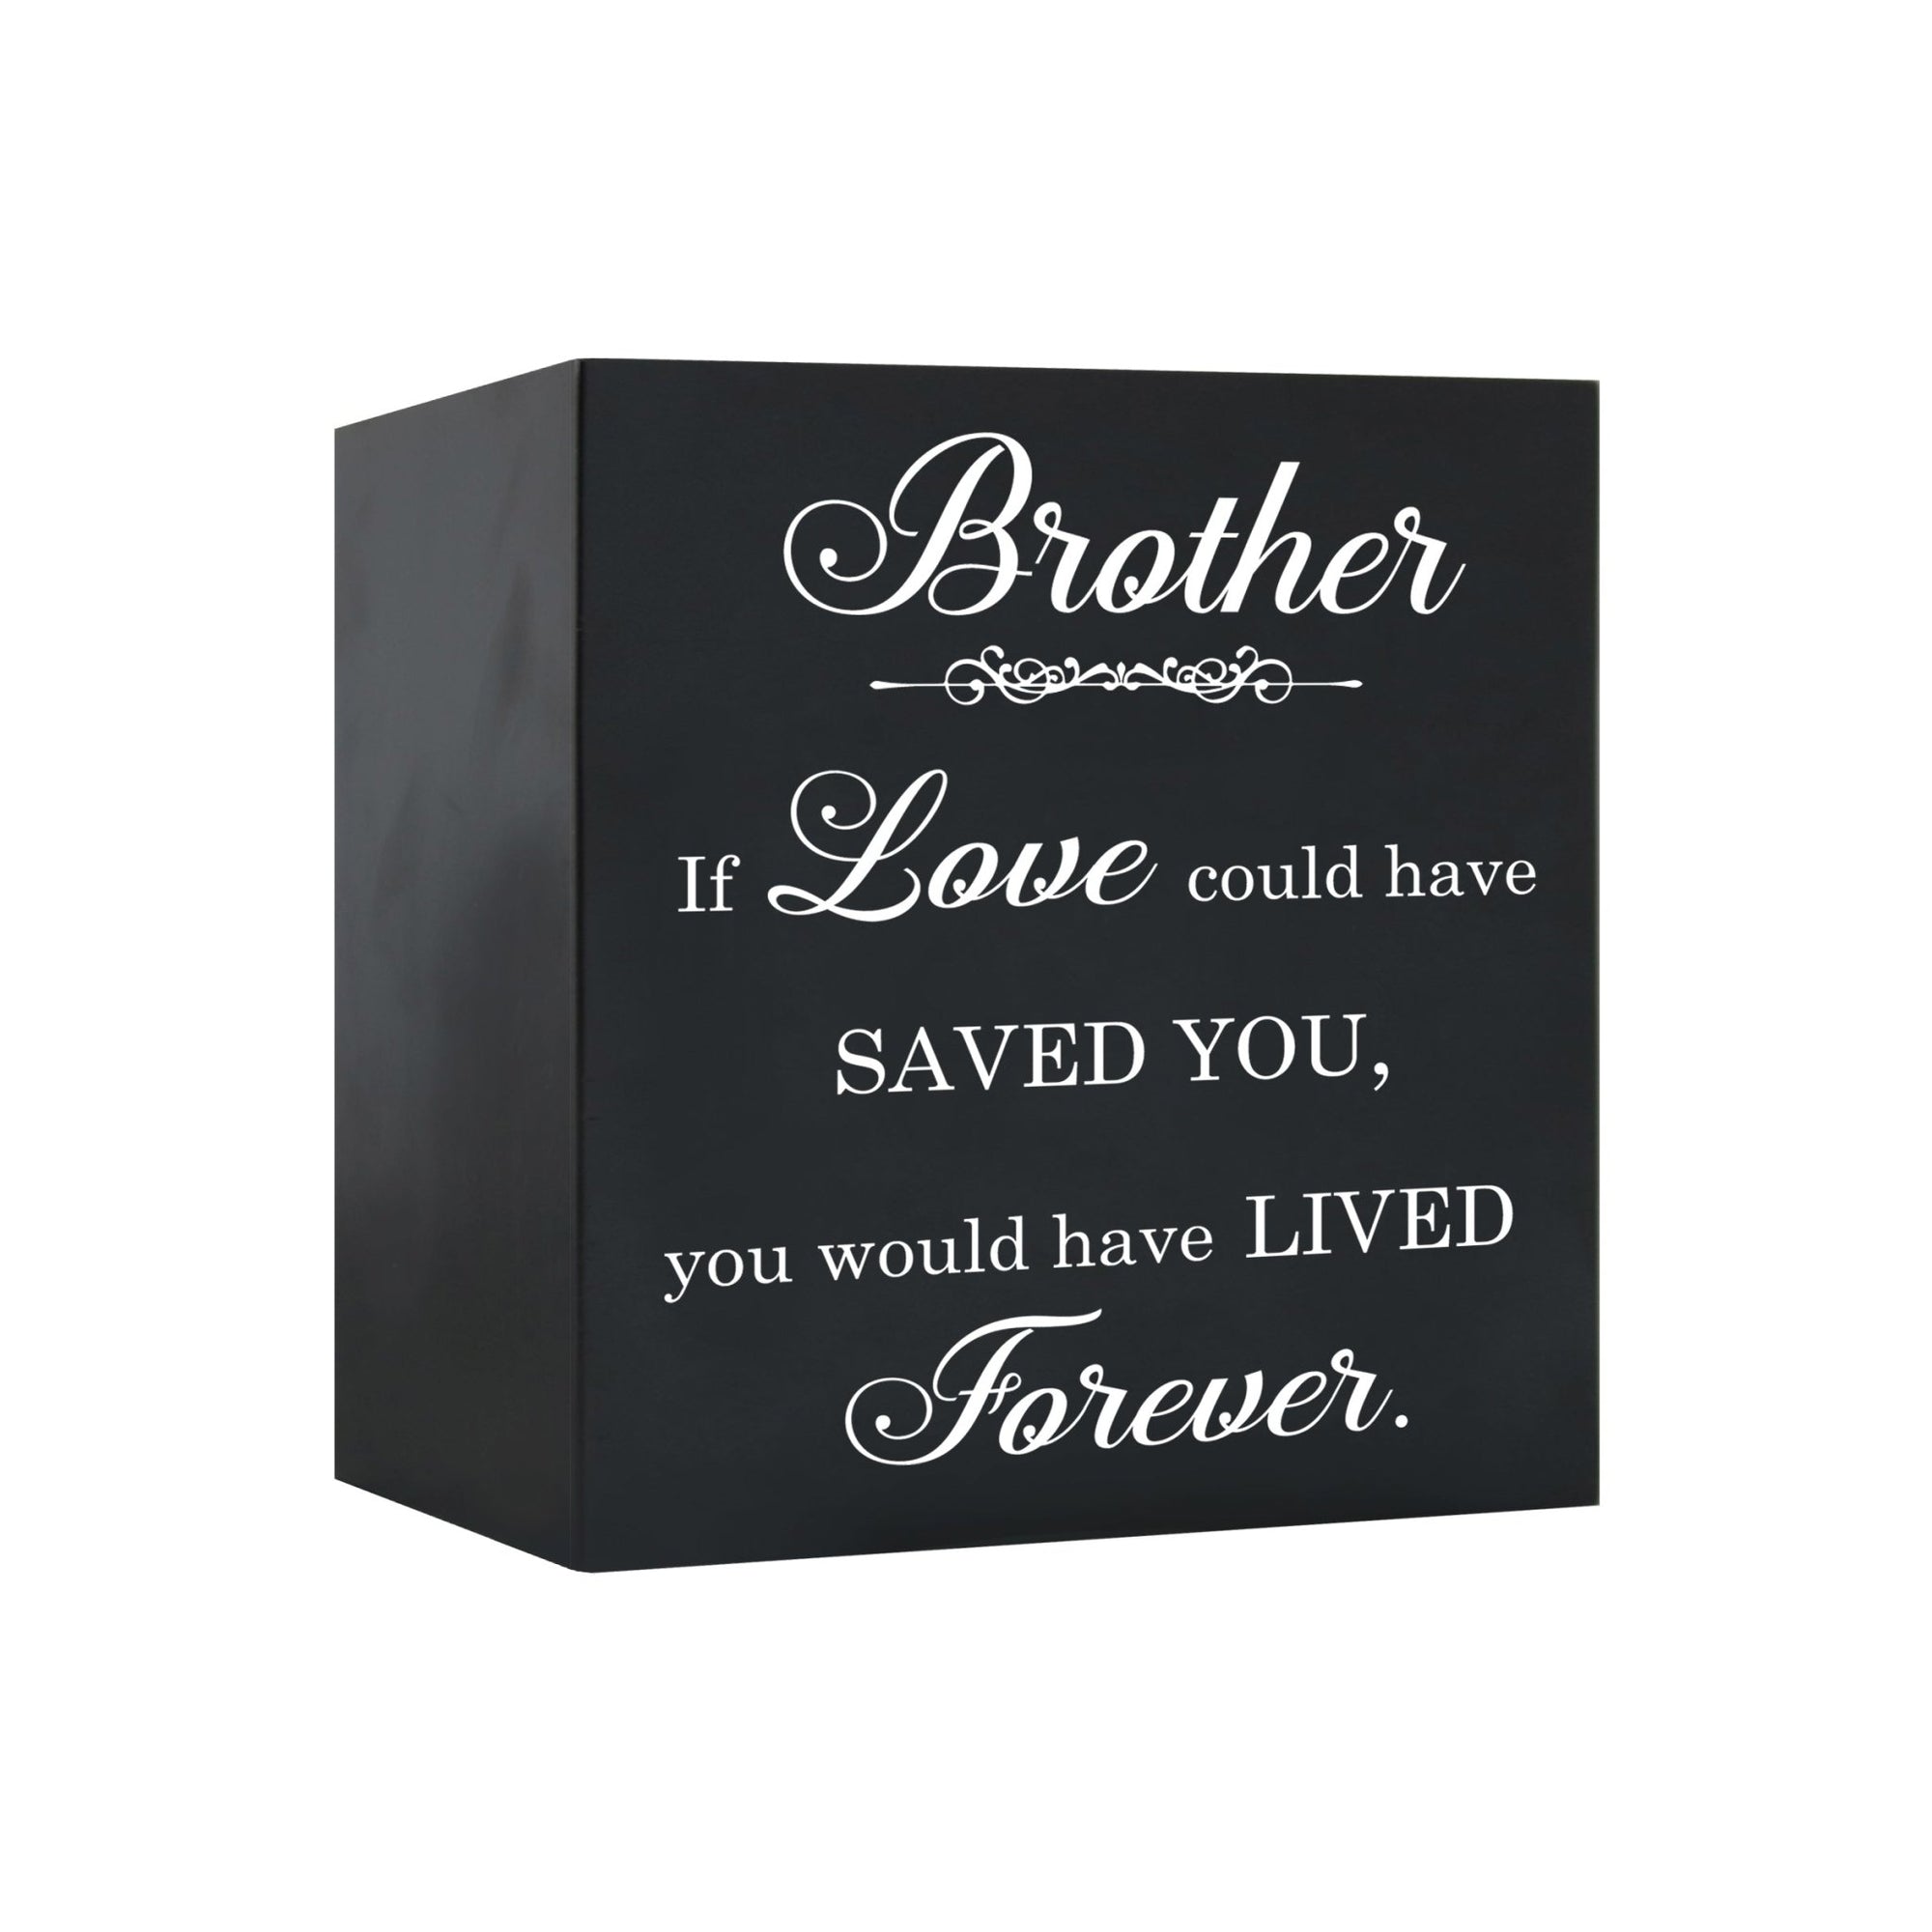 Memorial Bereavement Keepsake Cremation Shadow Box and Urn 6x6in Holds 53 Cu Inches Of Human Ashes Brother, If Love Could - LifeSong Milestones